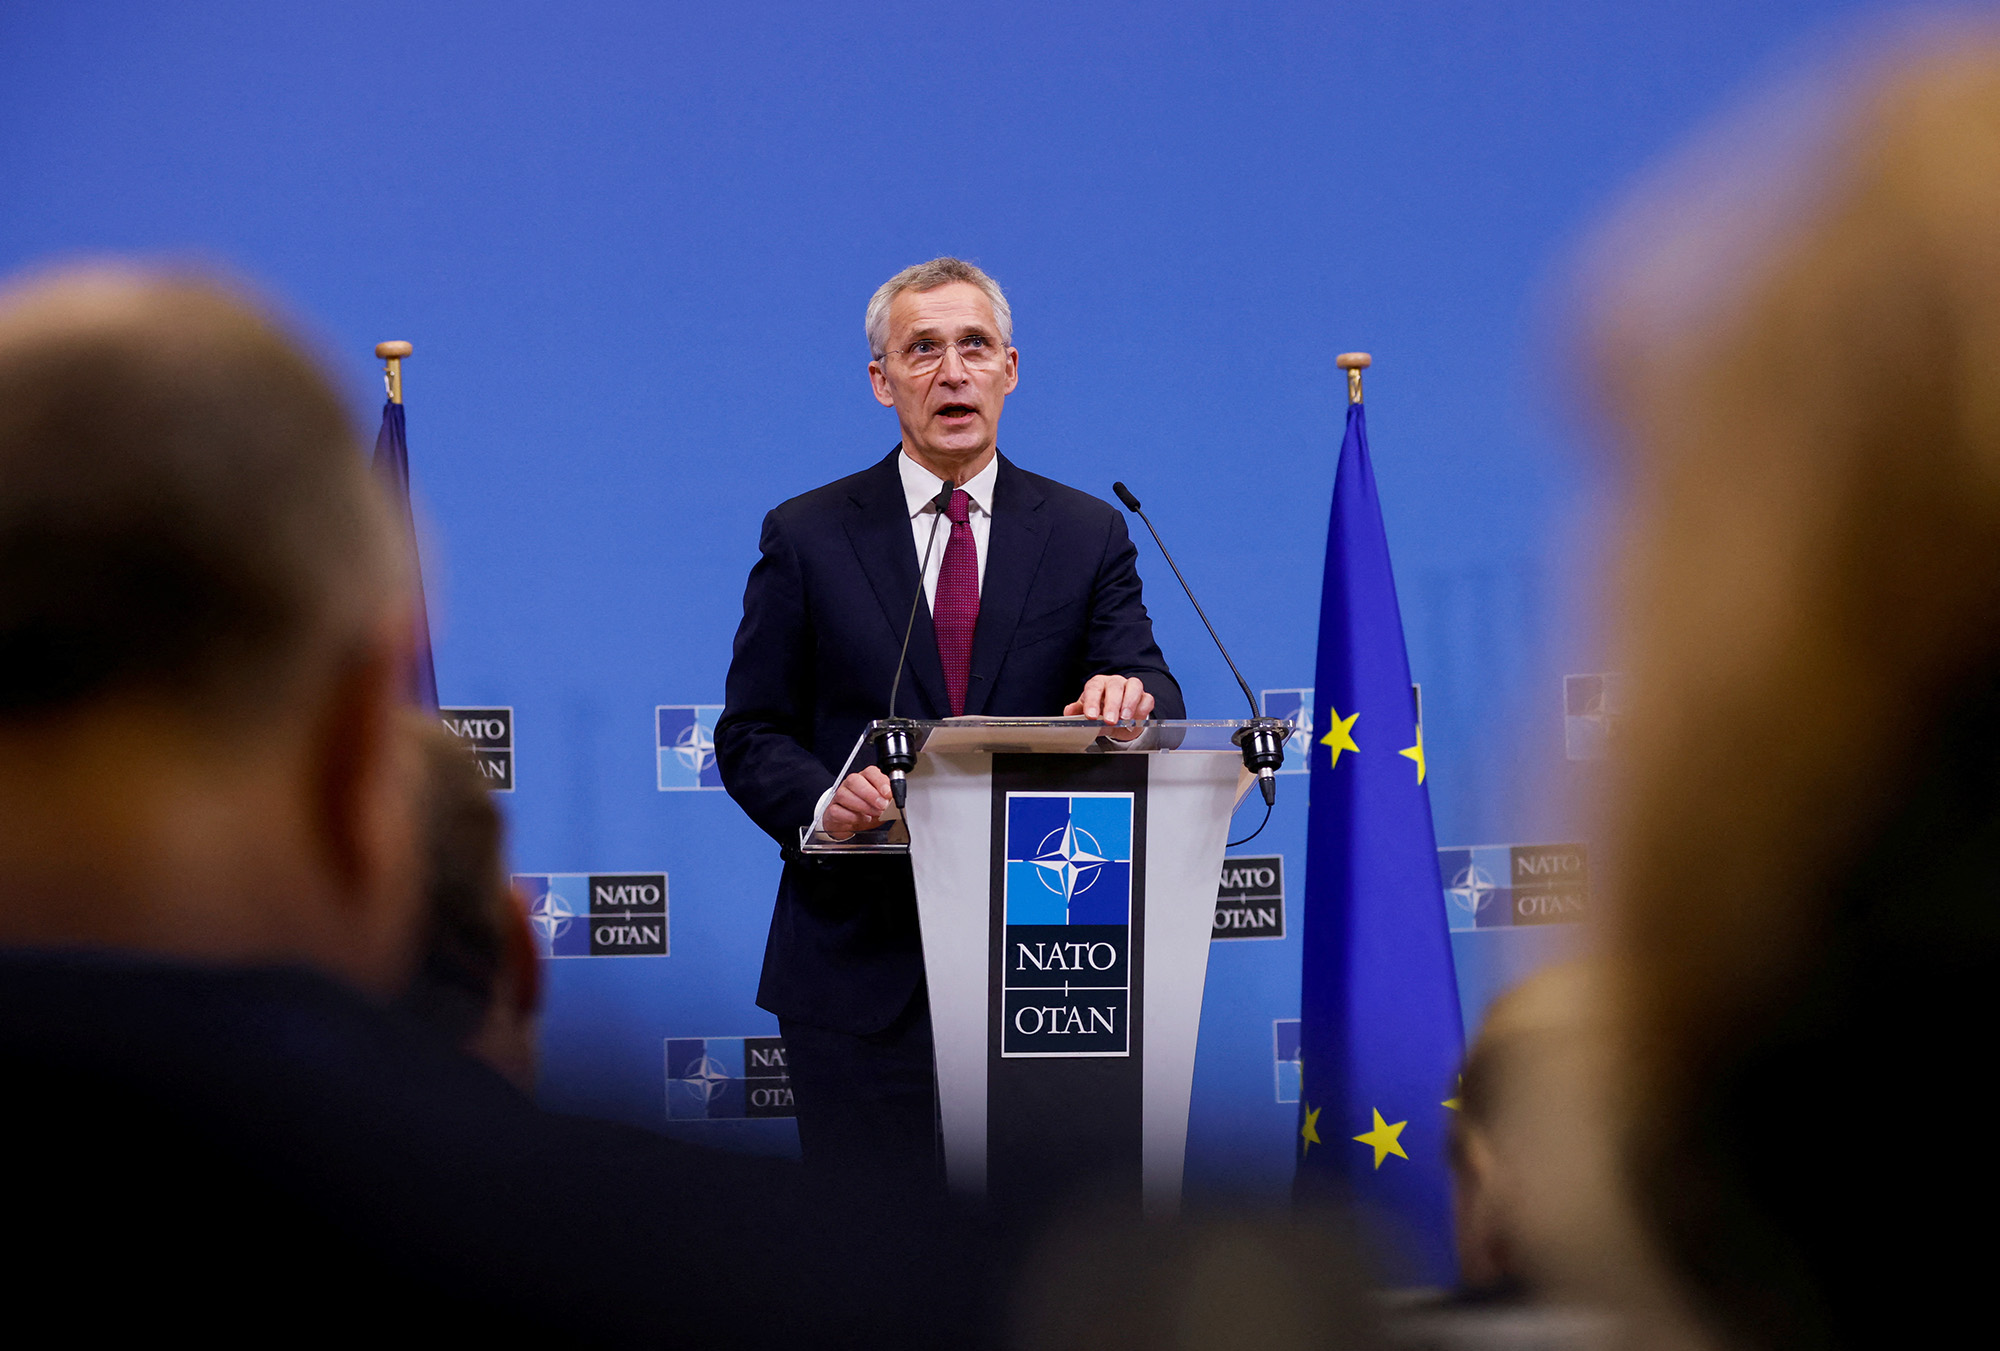 NATO Secretary General Jens Stoltenberg attends a news conference at the Alliance's headquarters in Brussels, Belgium, on February 21.